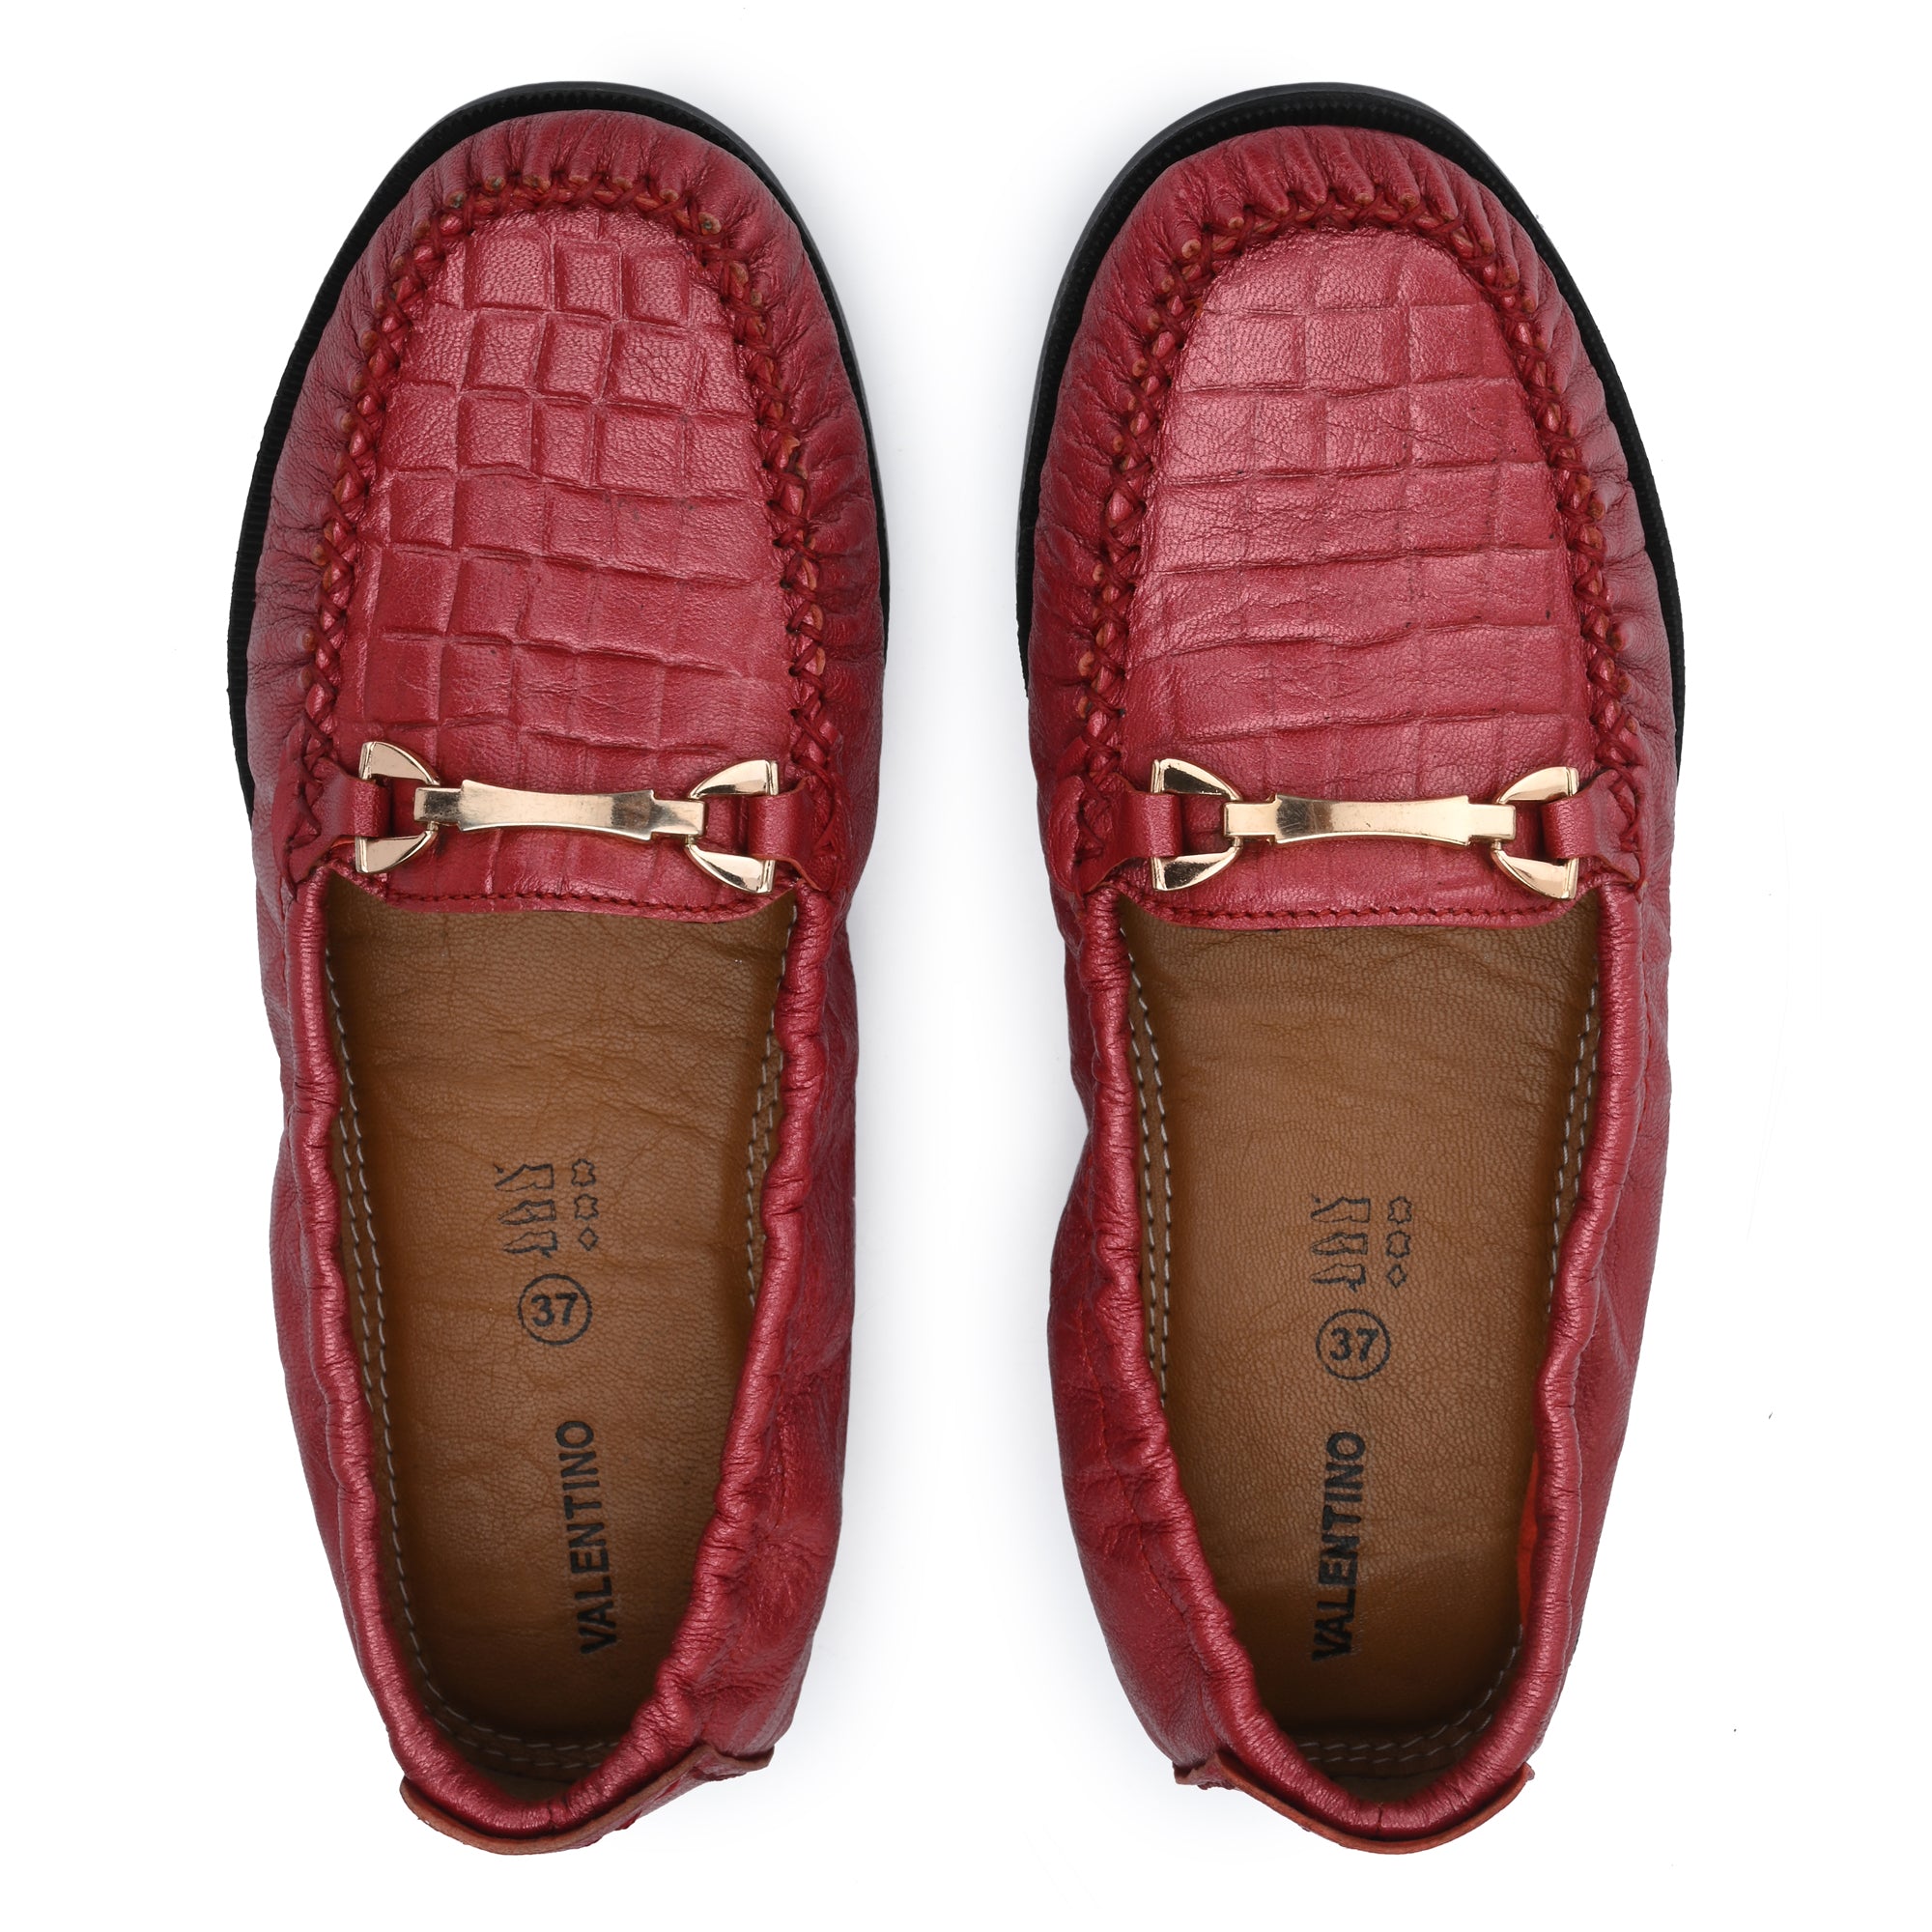 W-FLEXY-13 WOMEN LEATHER RED CASUAL SLIP ON LOAFER